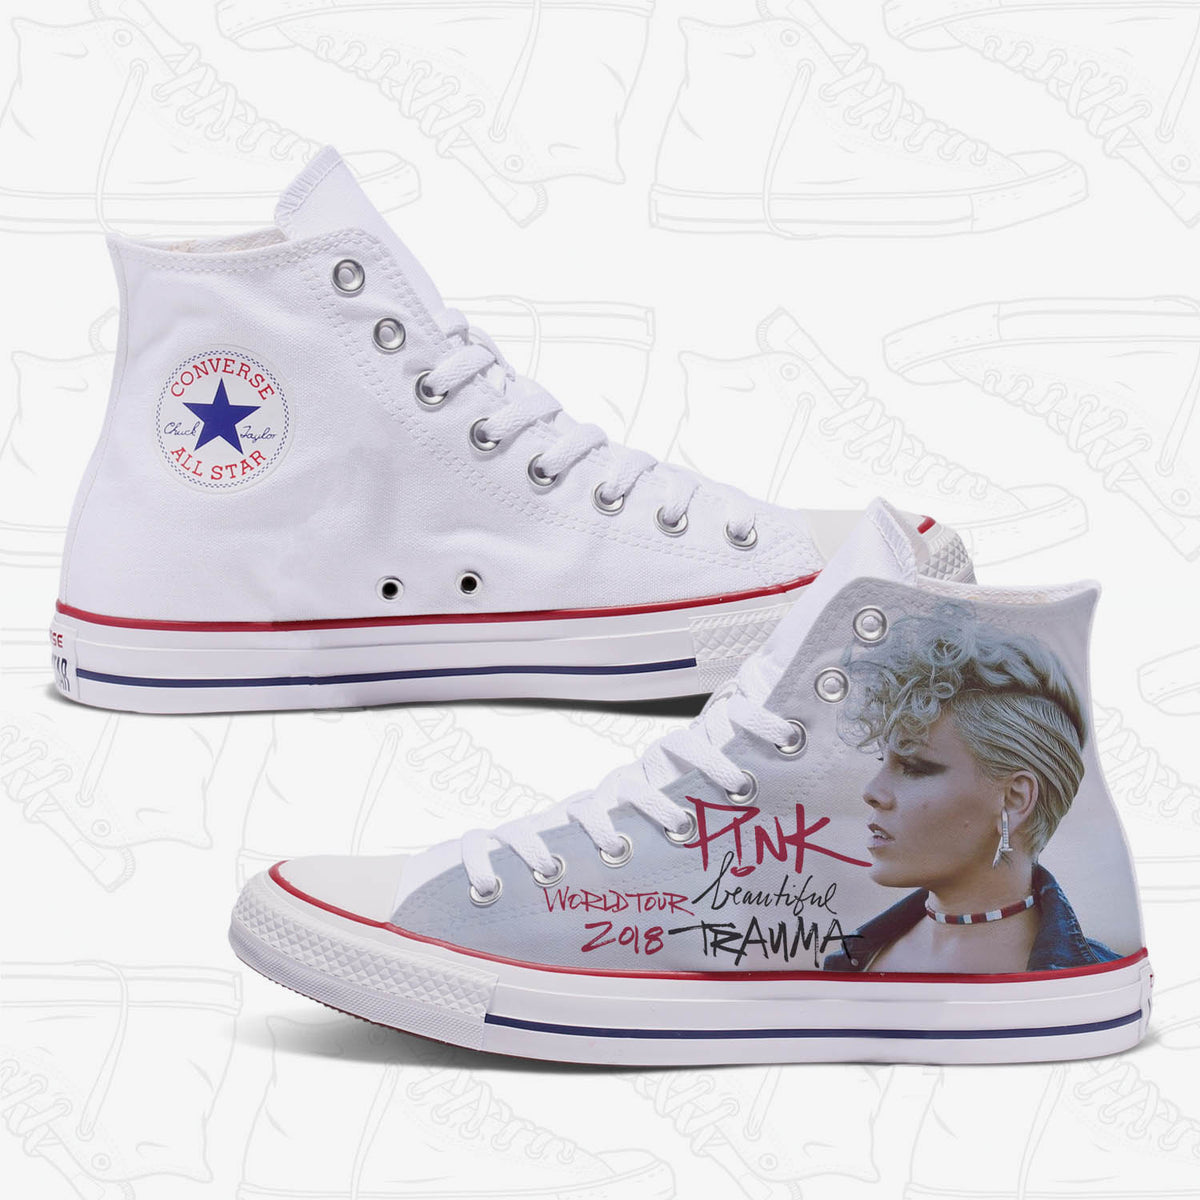 Pink Beautiful Trauma Adult Custom Converse Shoes | High and Low Top White